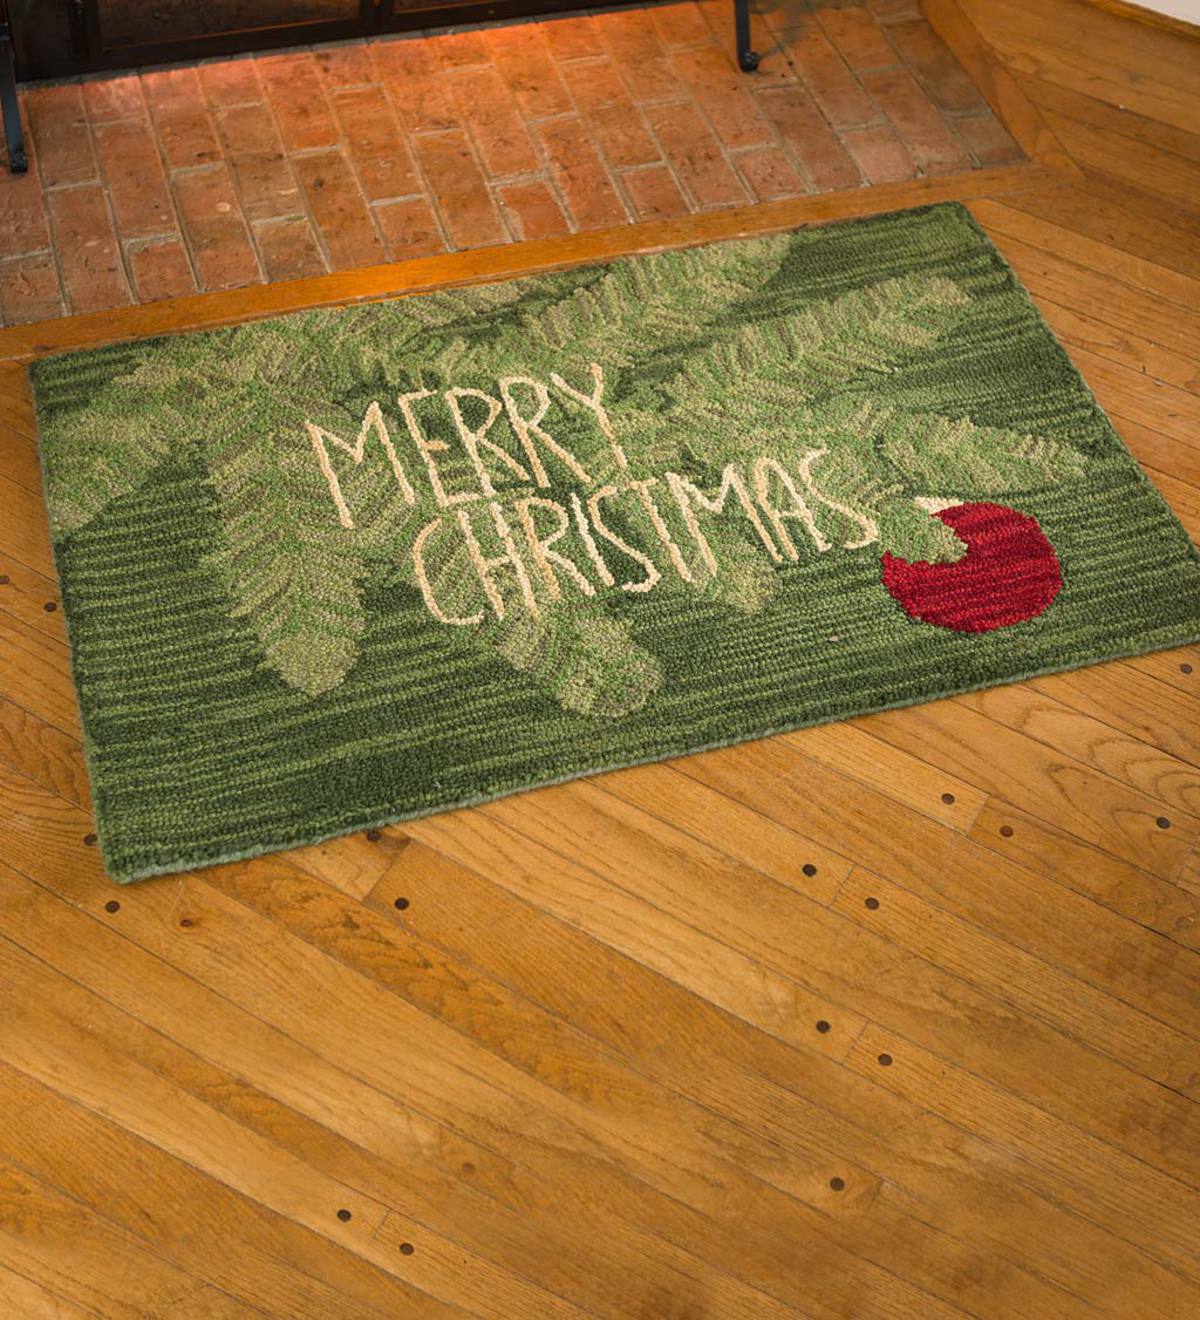 Merry Christmas Hand-Hooked Wool Accent Rug | Plow & Hearth